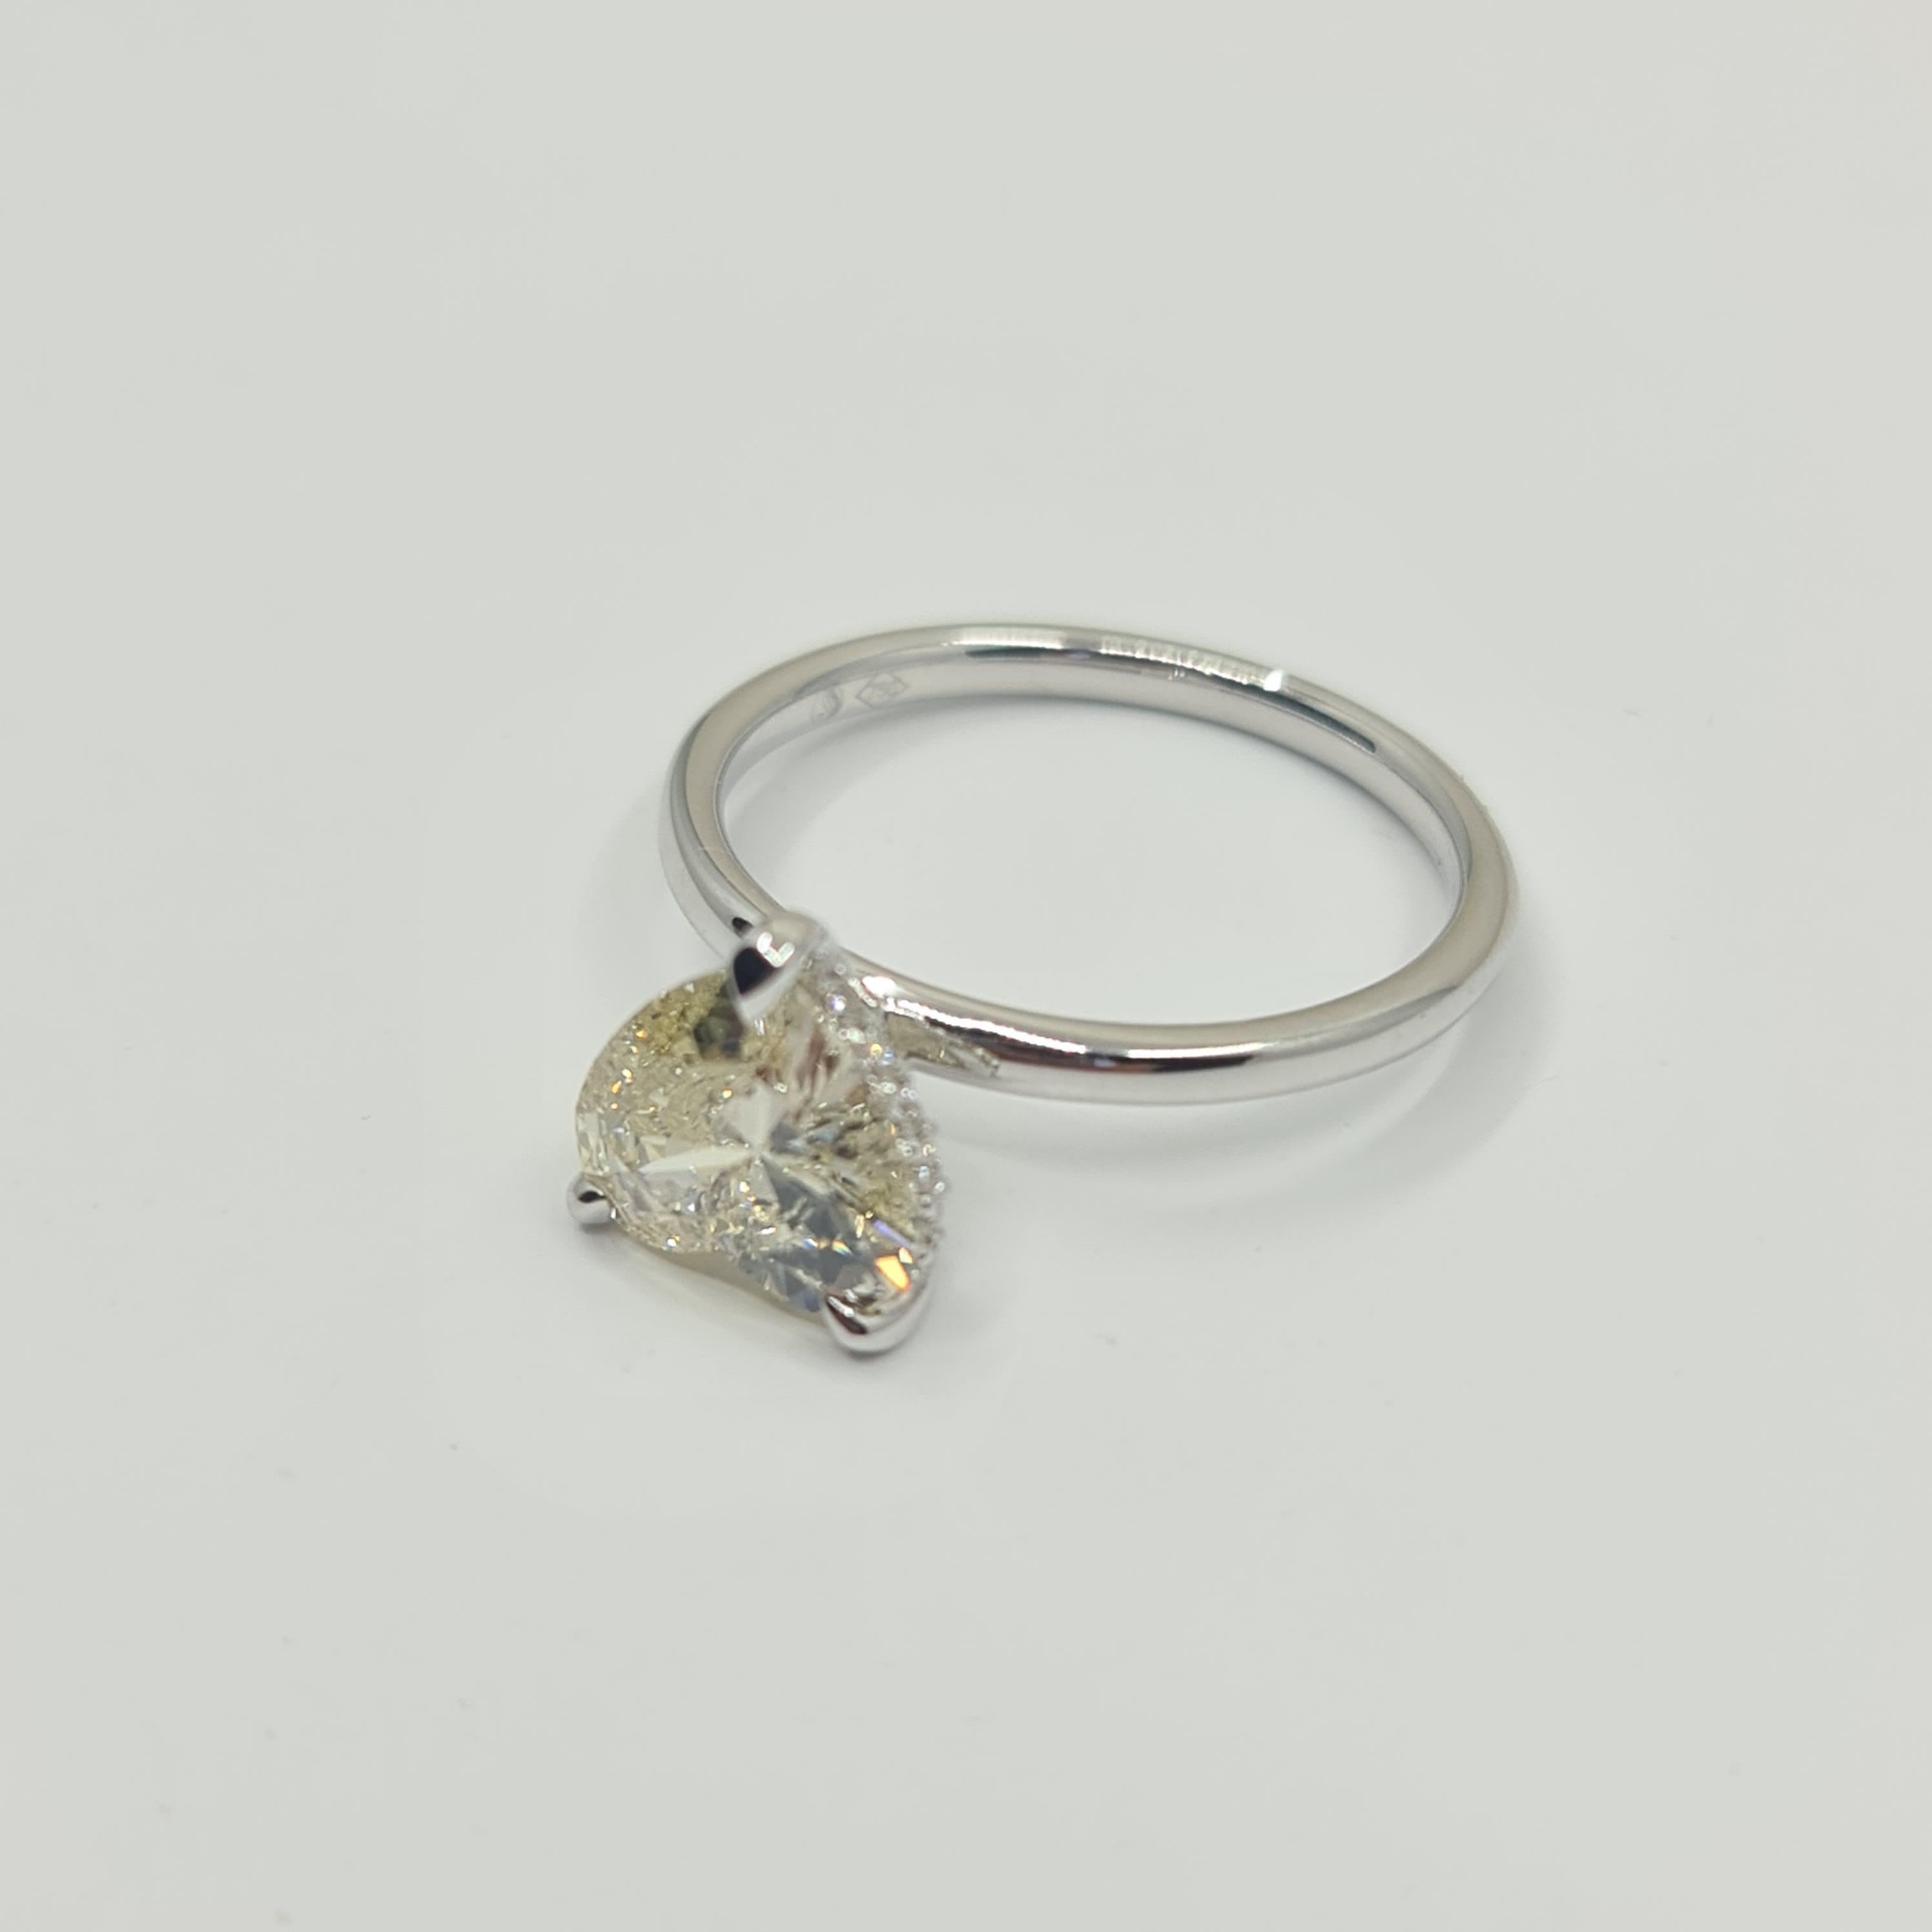 Exquisite GIA Certified 1.60 Carat Heart Diamond Ring with 0.07 Carat Halo G/VS For Sale 7